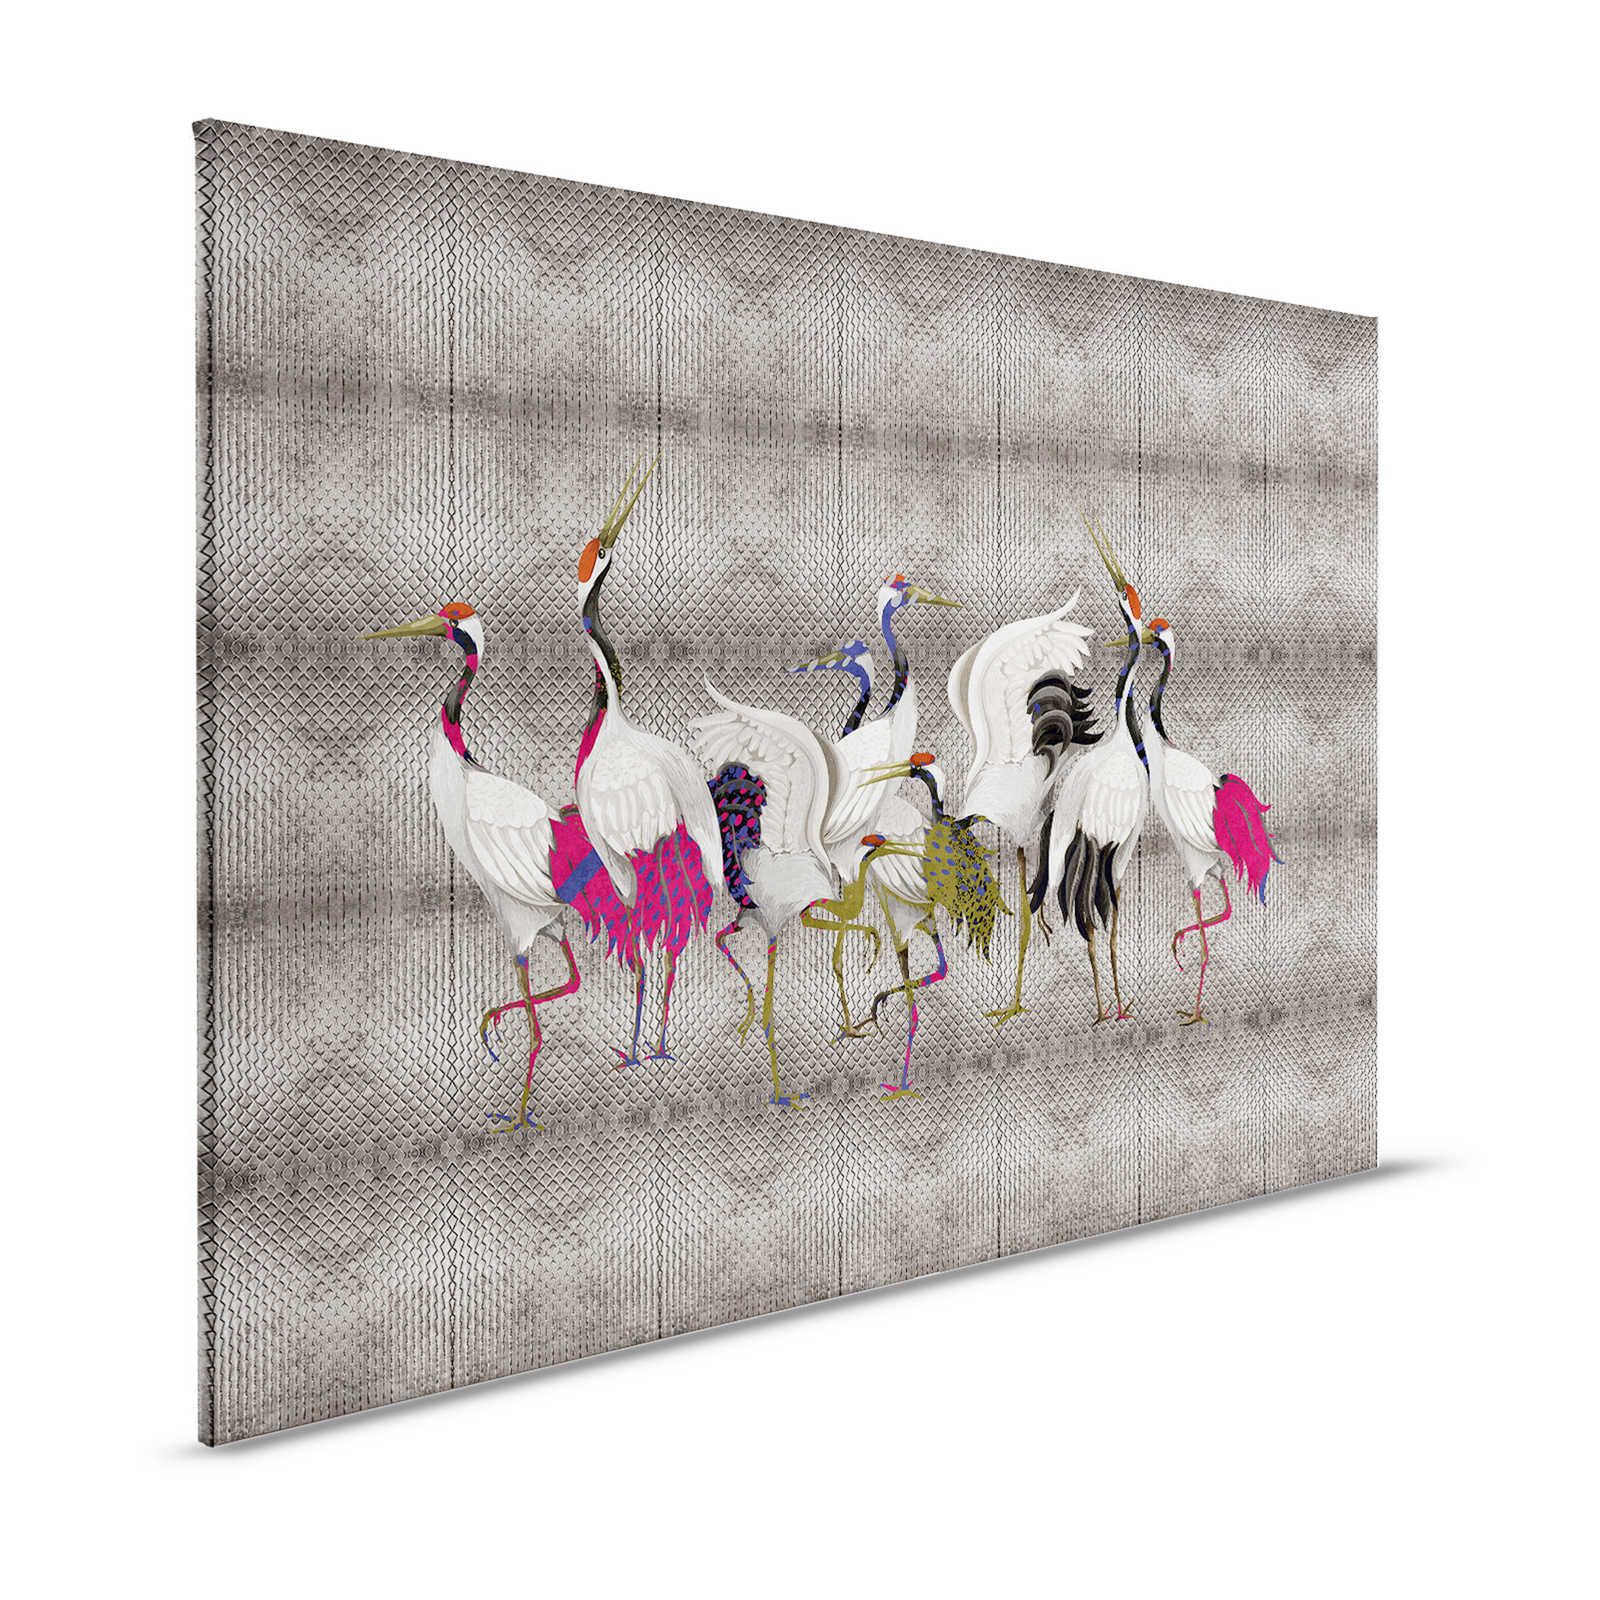 Land of Happiness 3 - Metallic Canvas Painting Silver with Colourful Crane Motif - 1.20 m x 0.80 m
